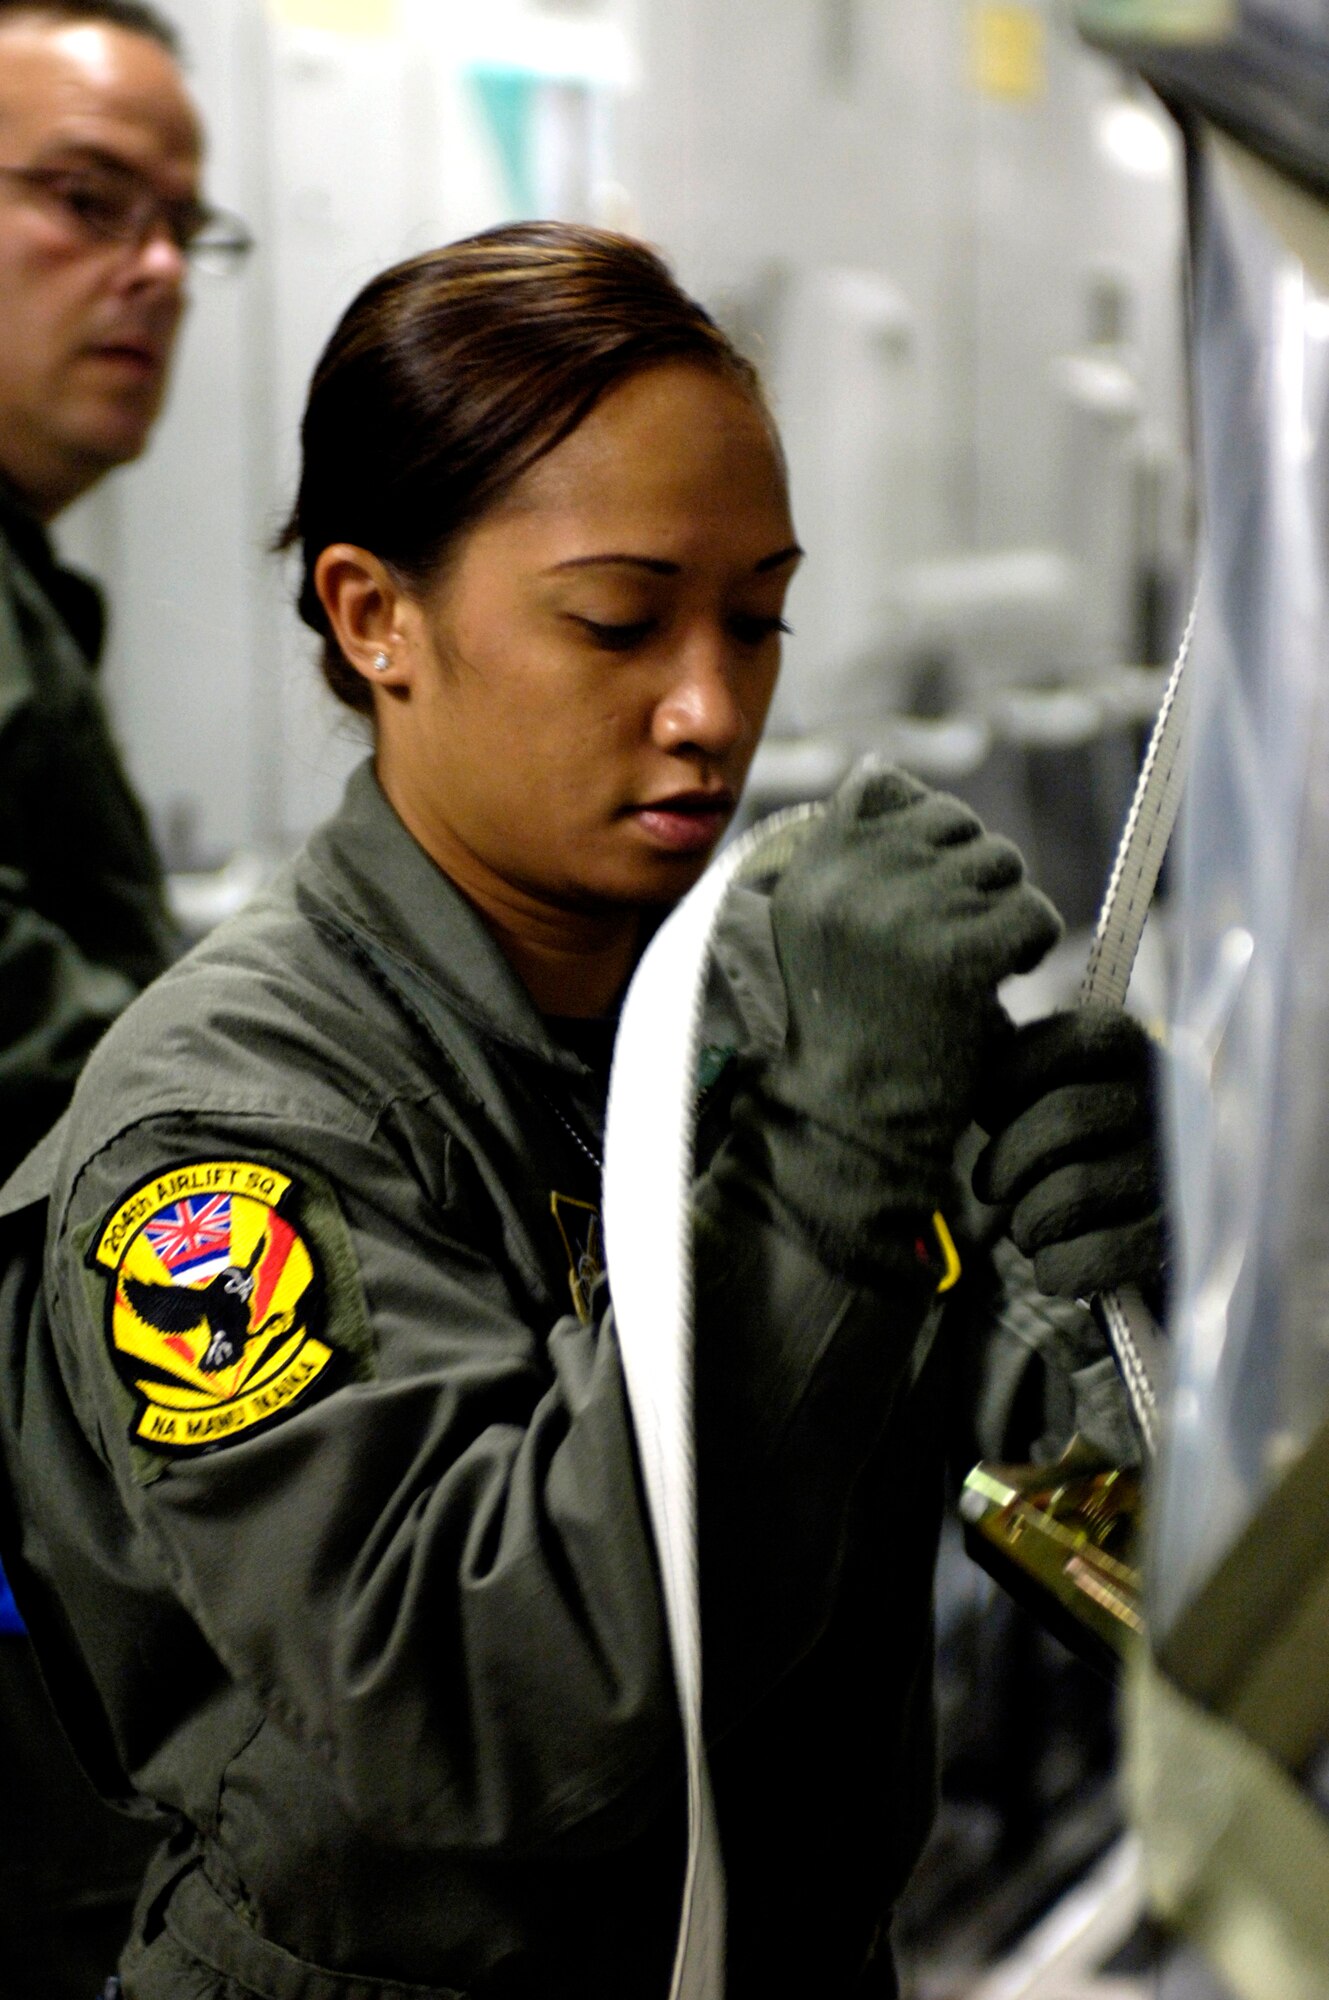 Staff Sgt. Joleen Manuia tightens a cargo strap on an equipment pallet on a C-17 Globemaster III at Royal Australian Air Force Base Townsville, Australia, on Sunday, May 28, 2006. Sergeant Manuia is a C-17 Globemaster III loadmaster with the Hawaii Air National Guard's 204th Airlift Squadron.  She is one of the Air Force crew members helping move equipment and troops from the Solomon Islands to Australia, repositioning Australian Defense Forces to support peace operations in East Timor. (U.S. Air Force photo/Tech. Sgt. Shane A. Cuomo) 